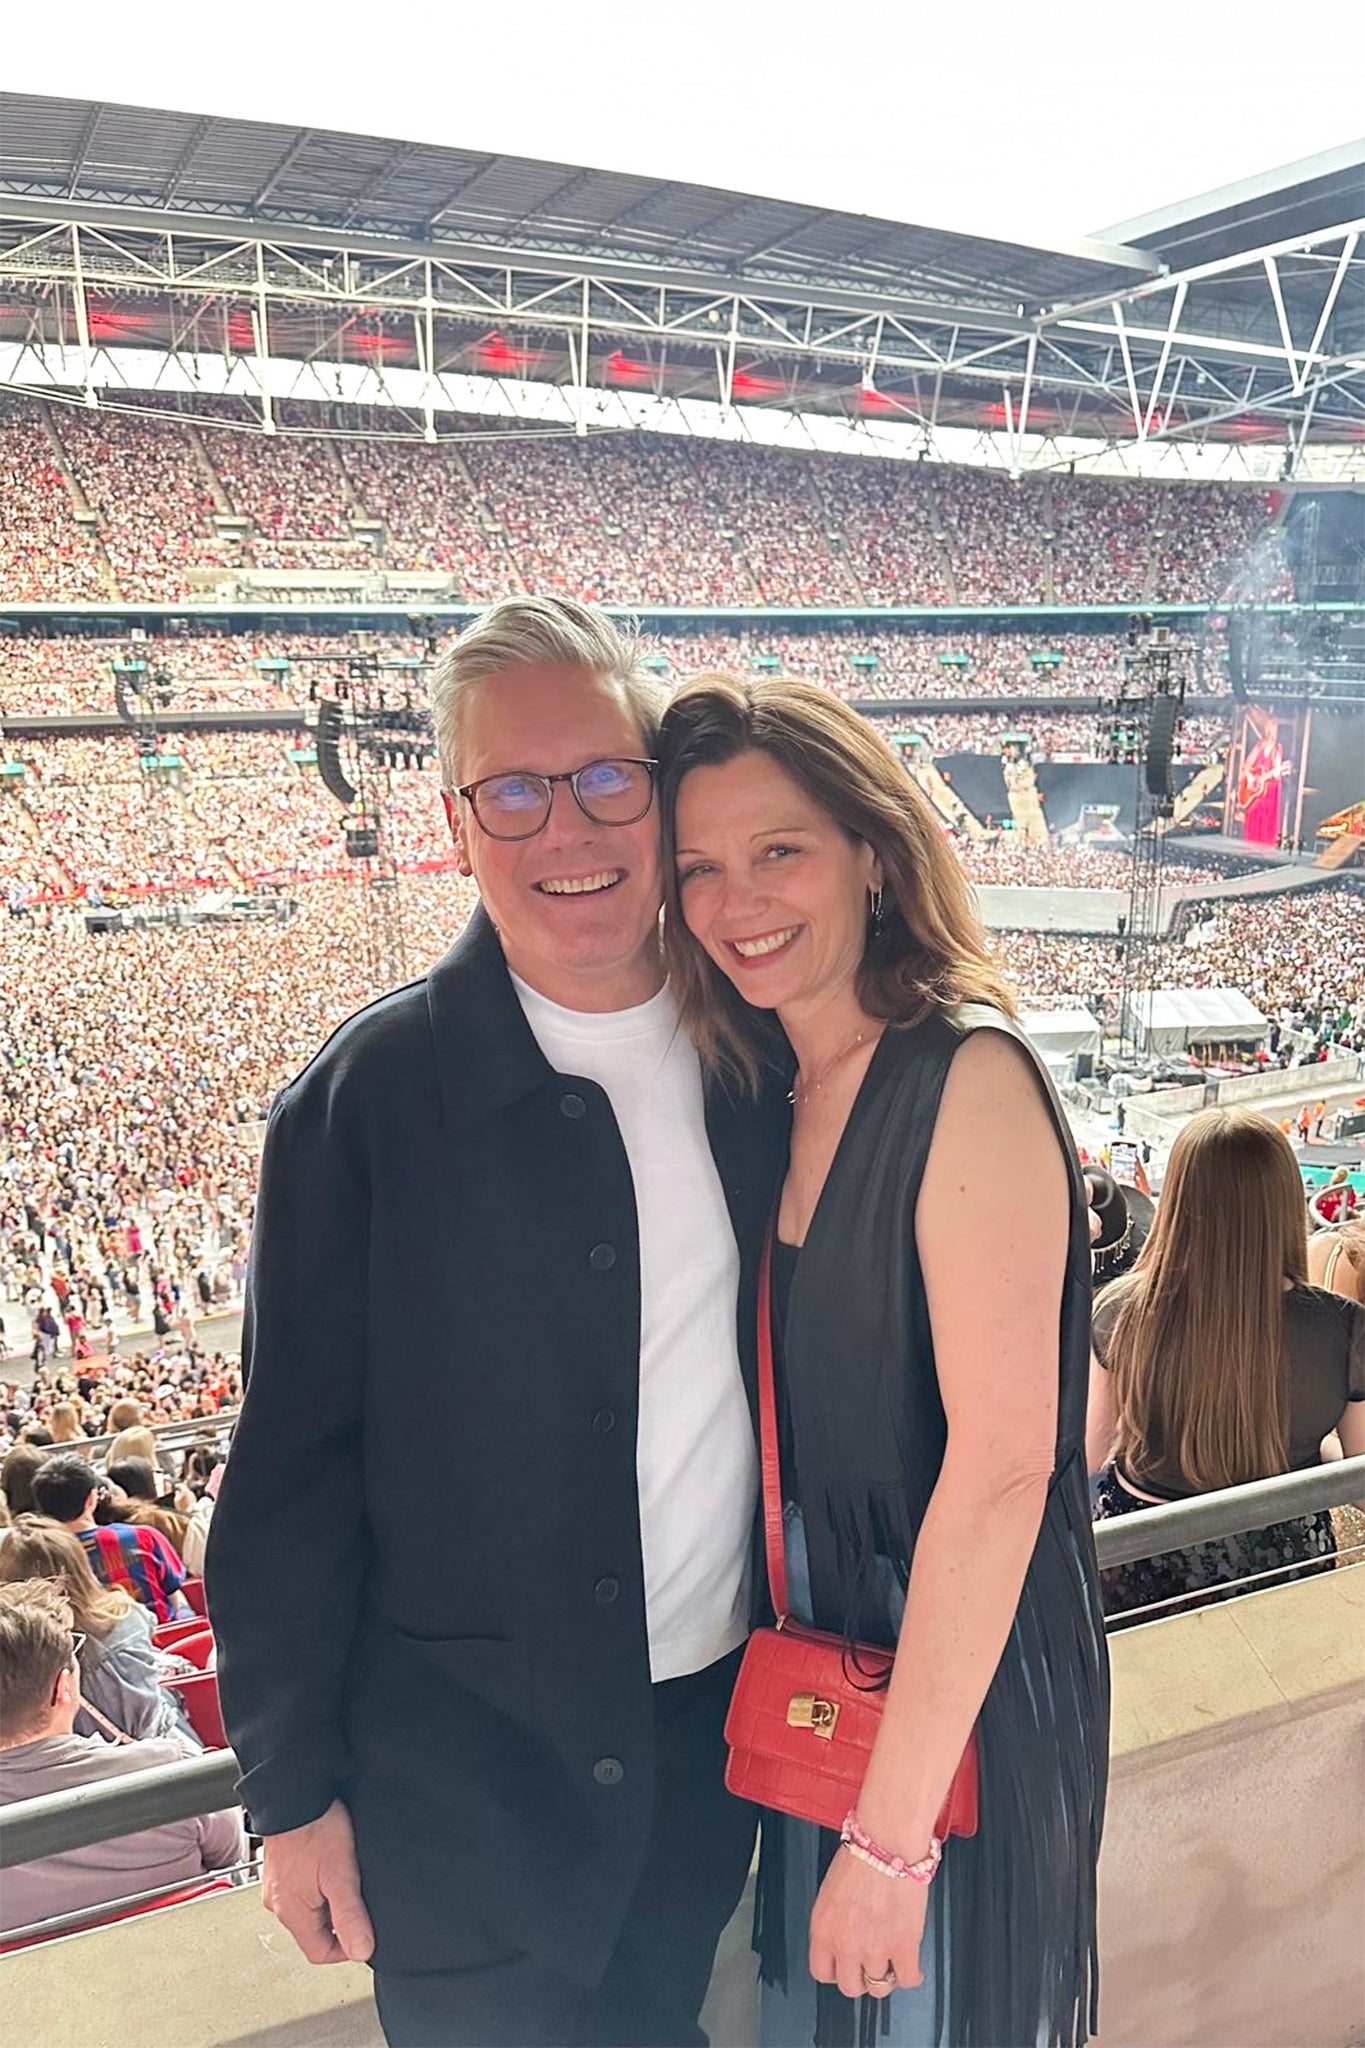 His rock: With wife Victoria at a Taylor Swift concert at Wembley